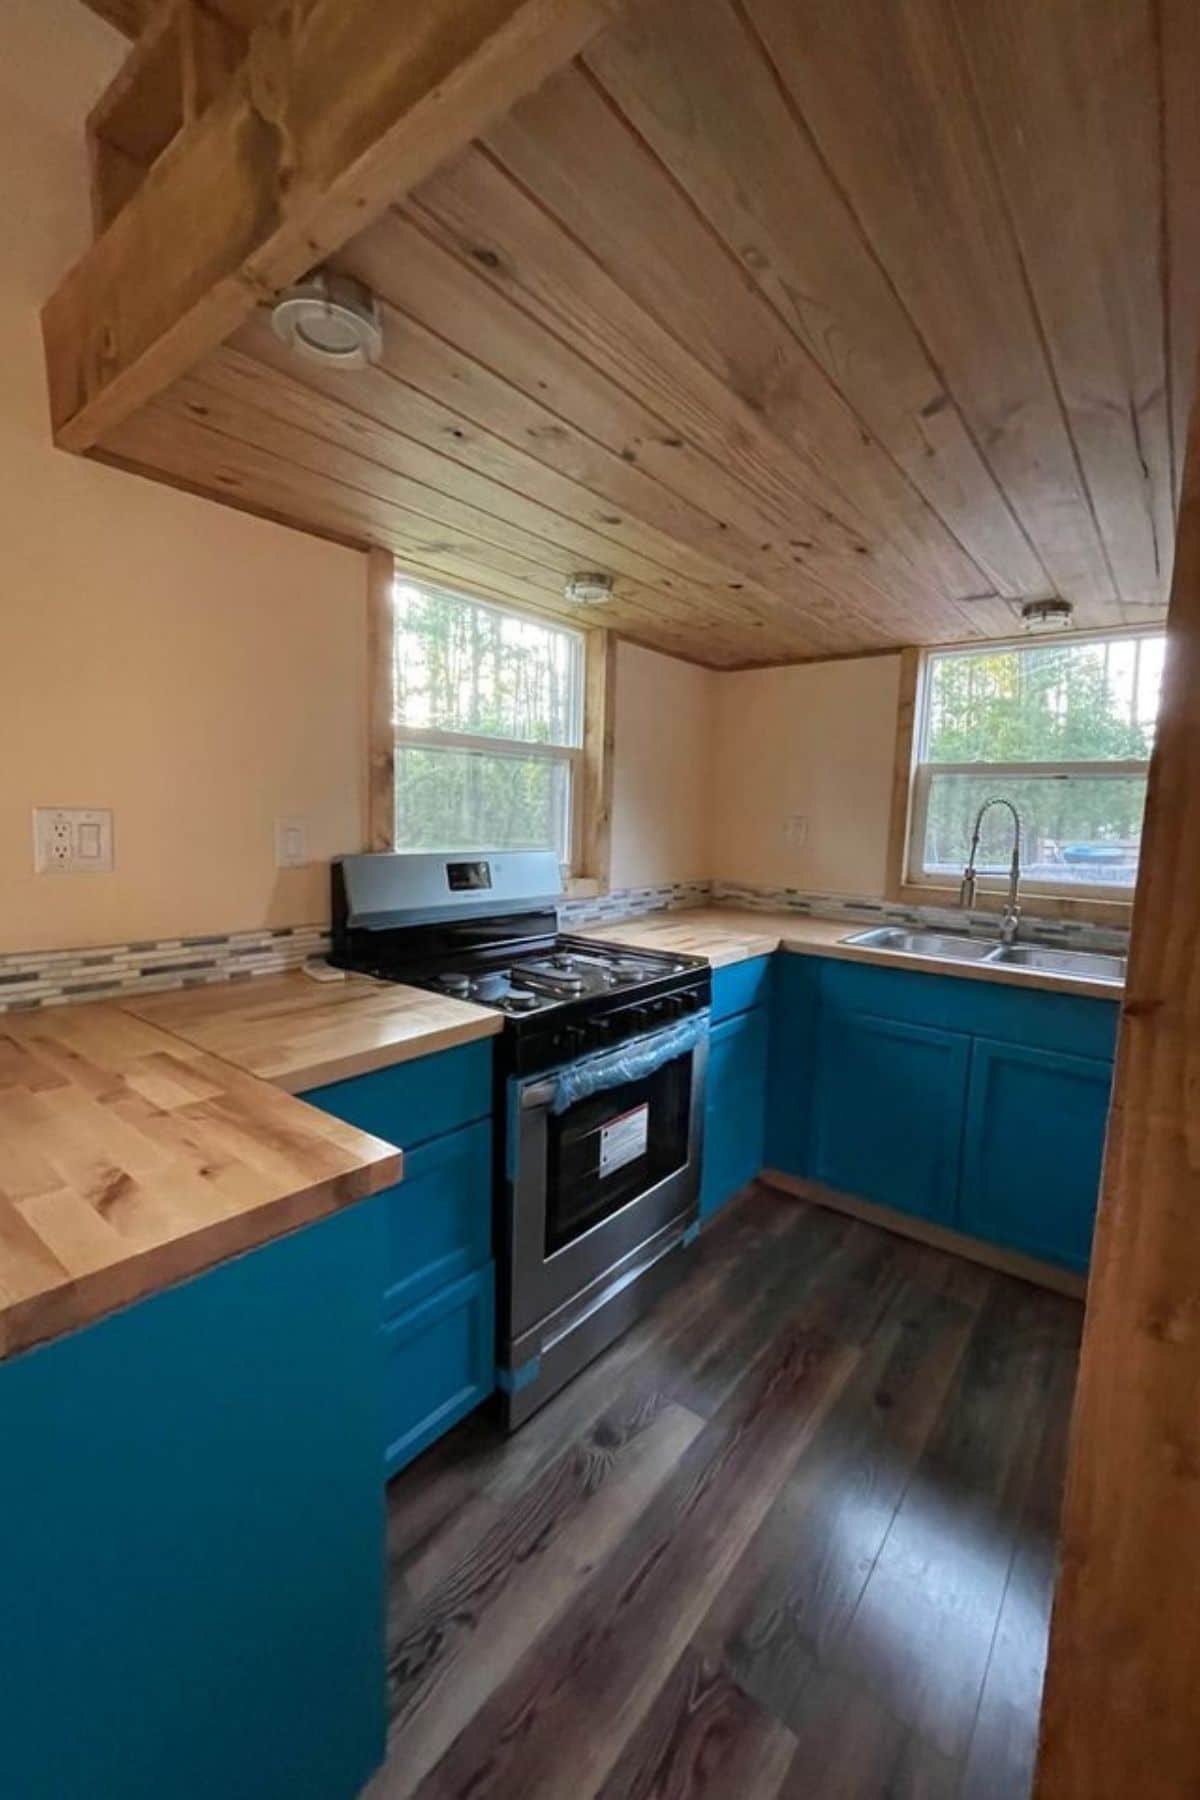 Bright blue cabinets with butcher block counters and stainless steel gas stove